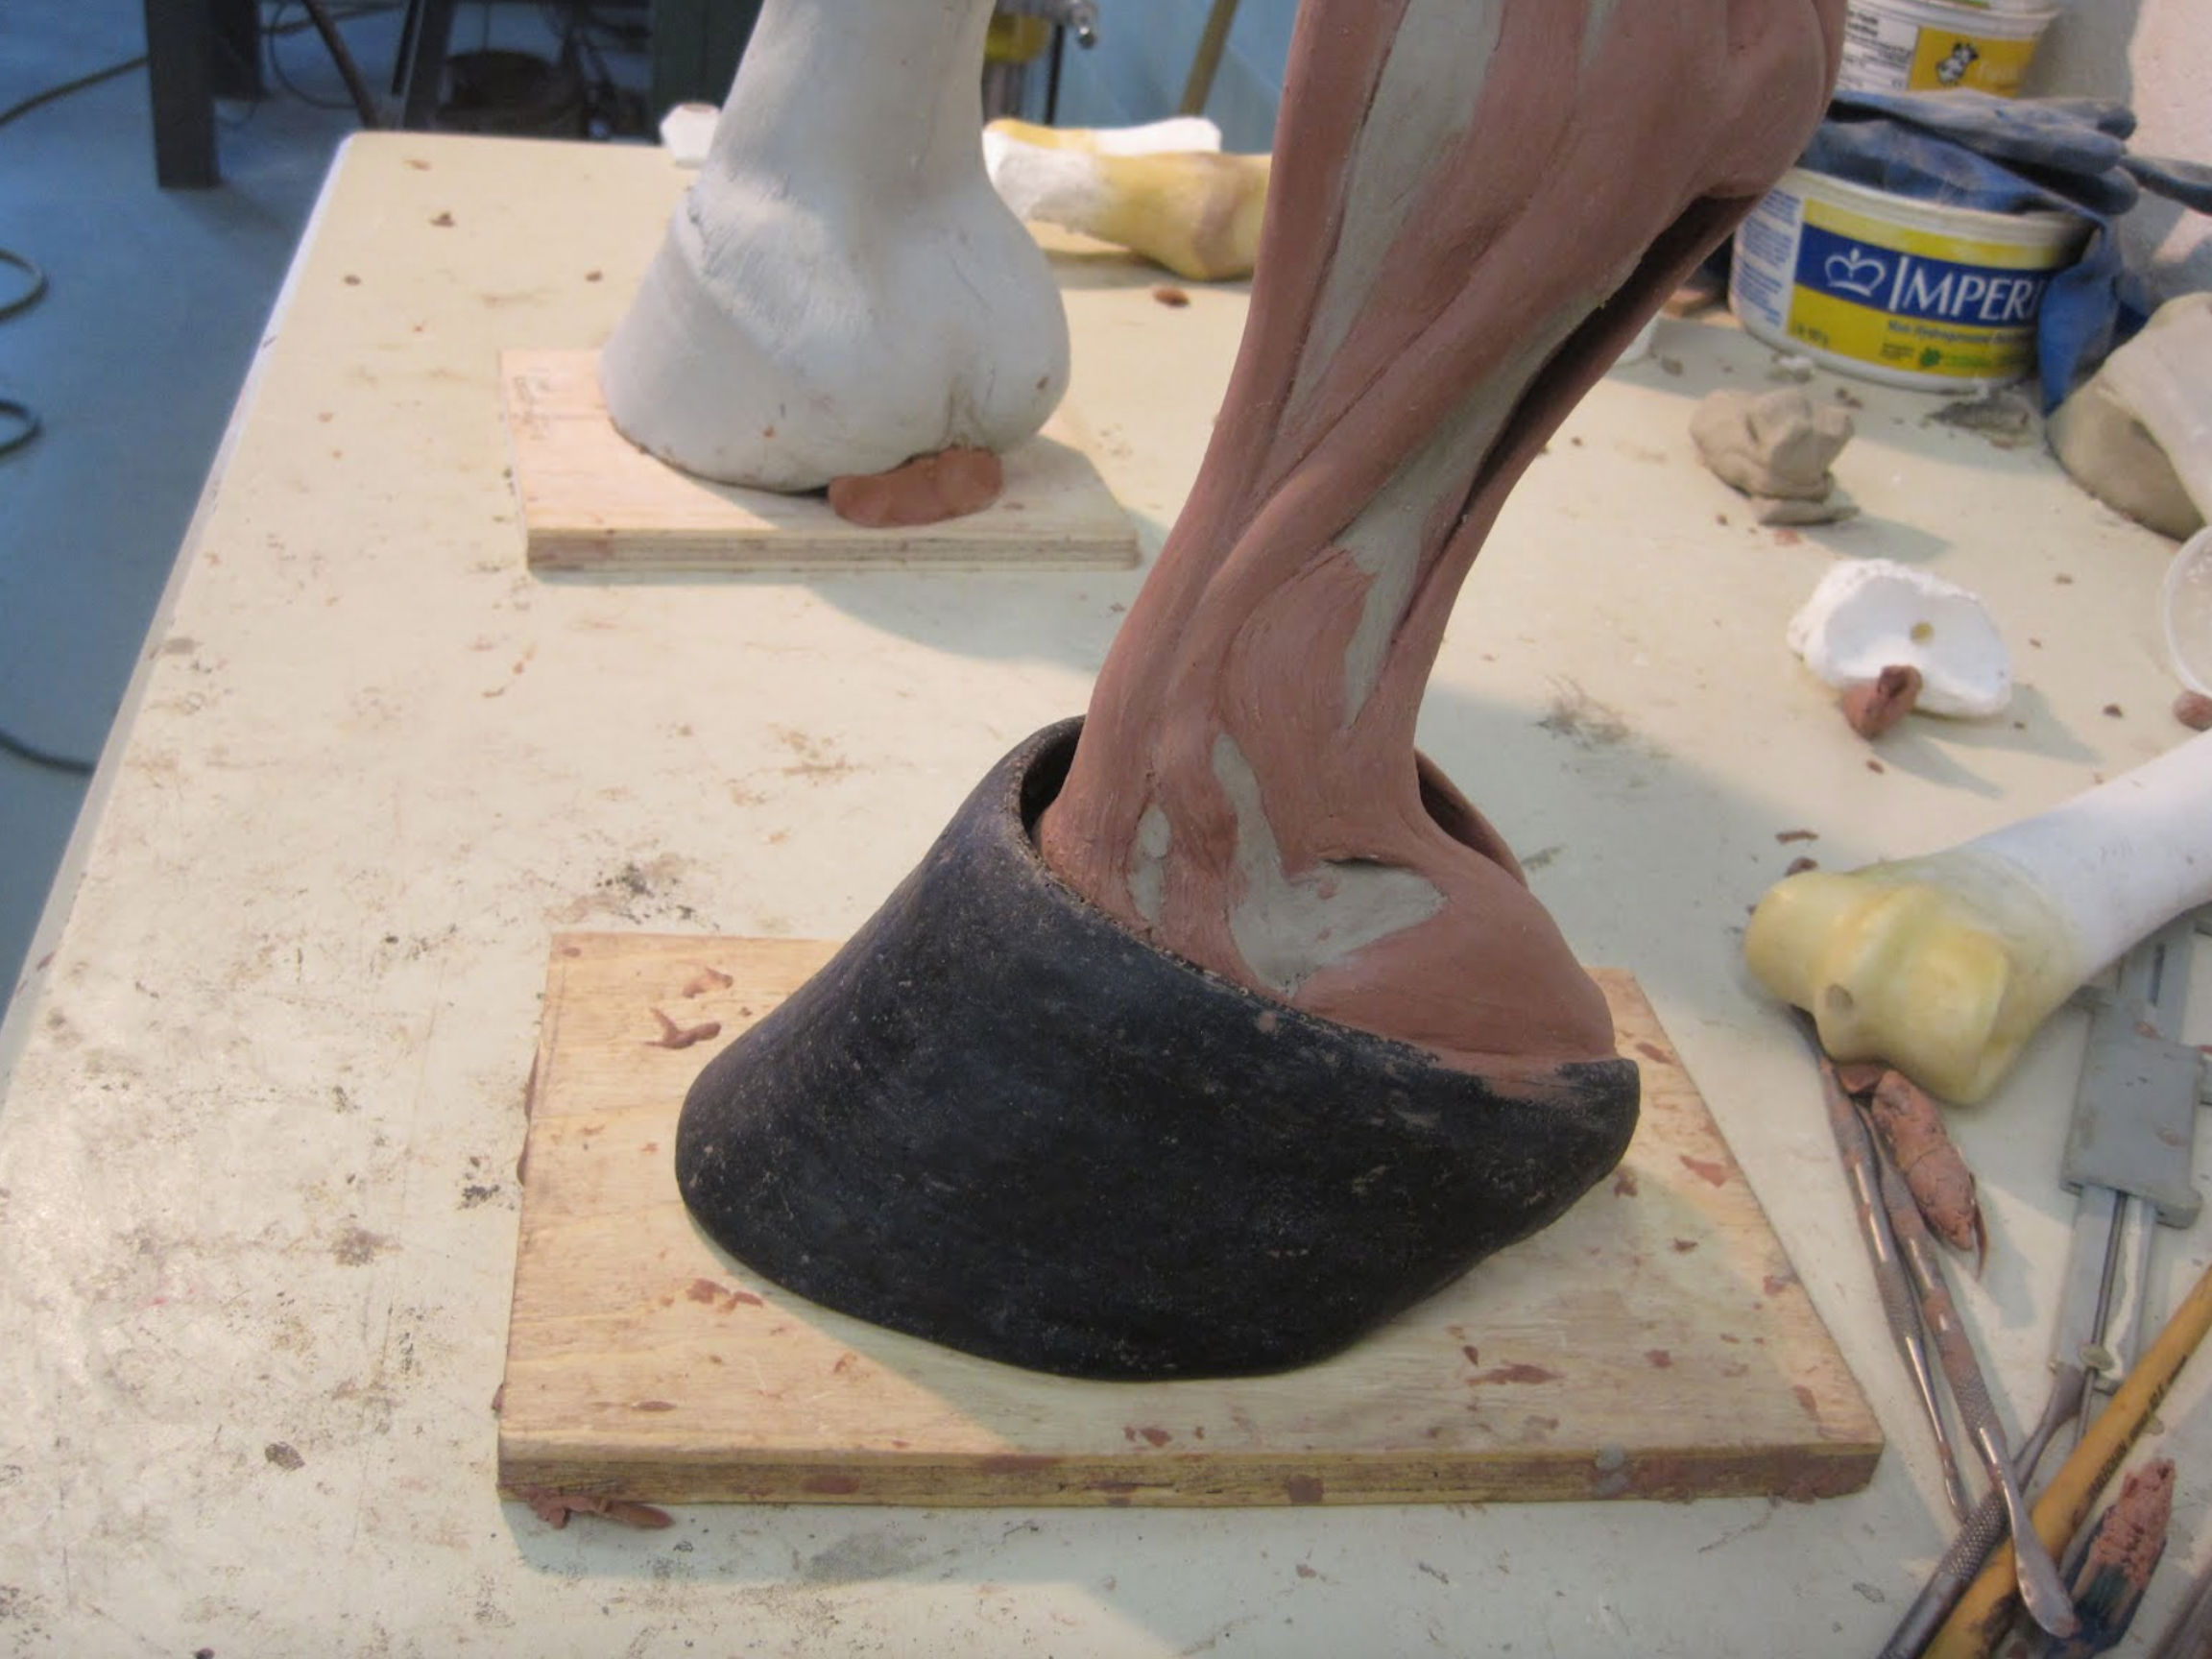  The sculpture of the tendons and ligaments is near completion. throughout the entire sculpting process we have been consulting with Dr. Emma Read and using many anatomical text books in order to ensure a high degree of accuracy. 